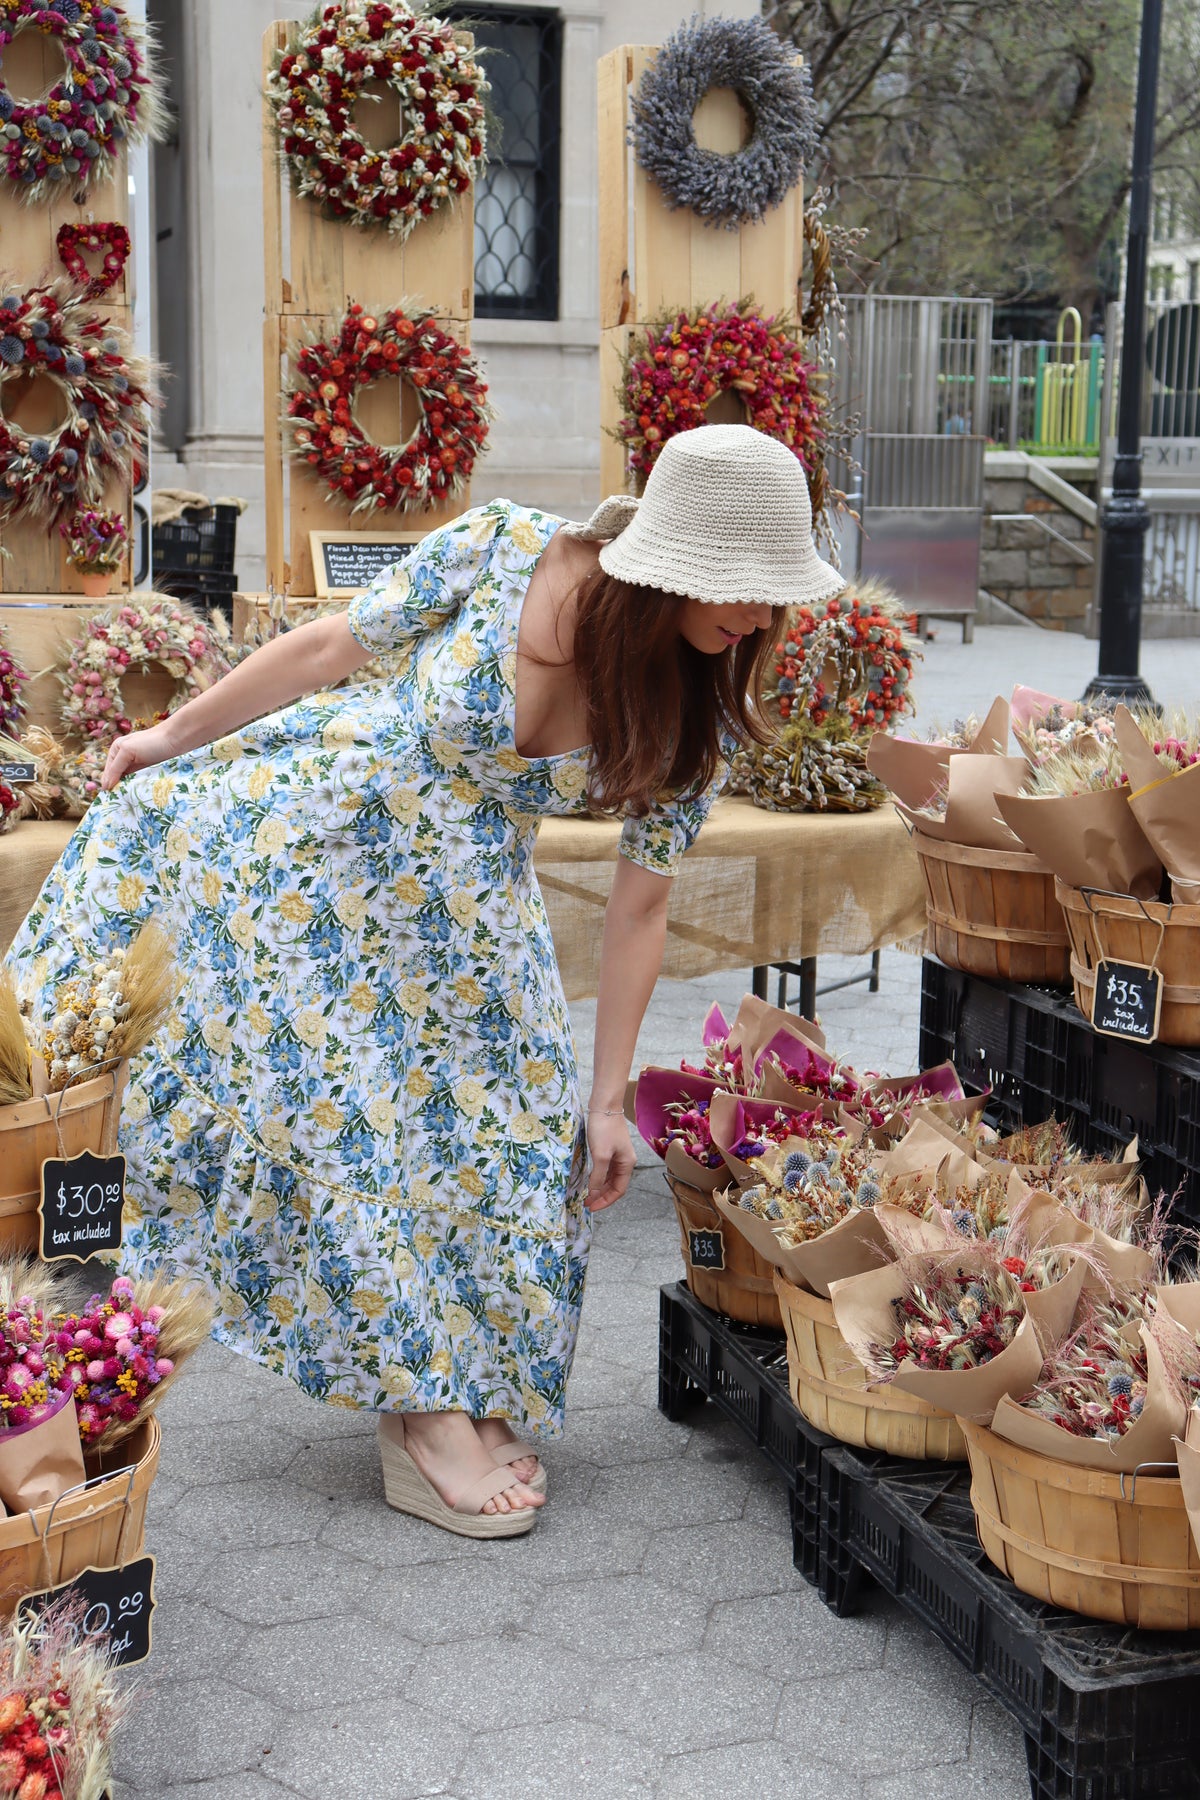 Model bending down wearing midi length dress of a yellow and blue floral print in front of a dried floral display.